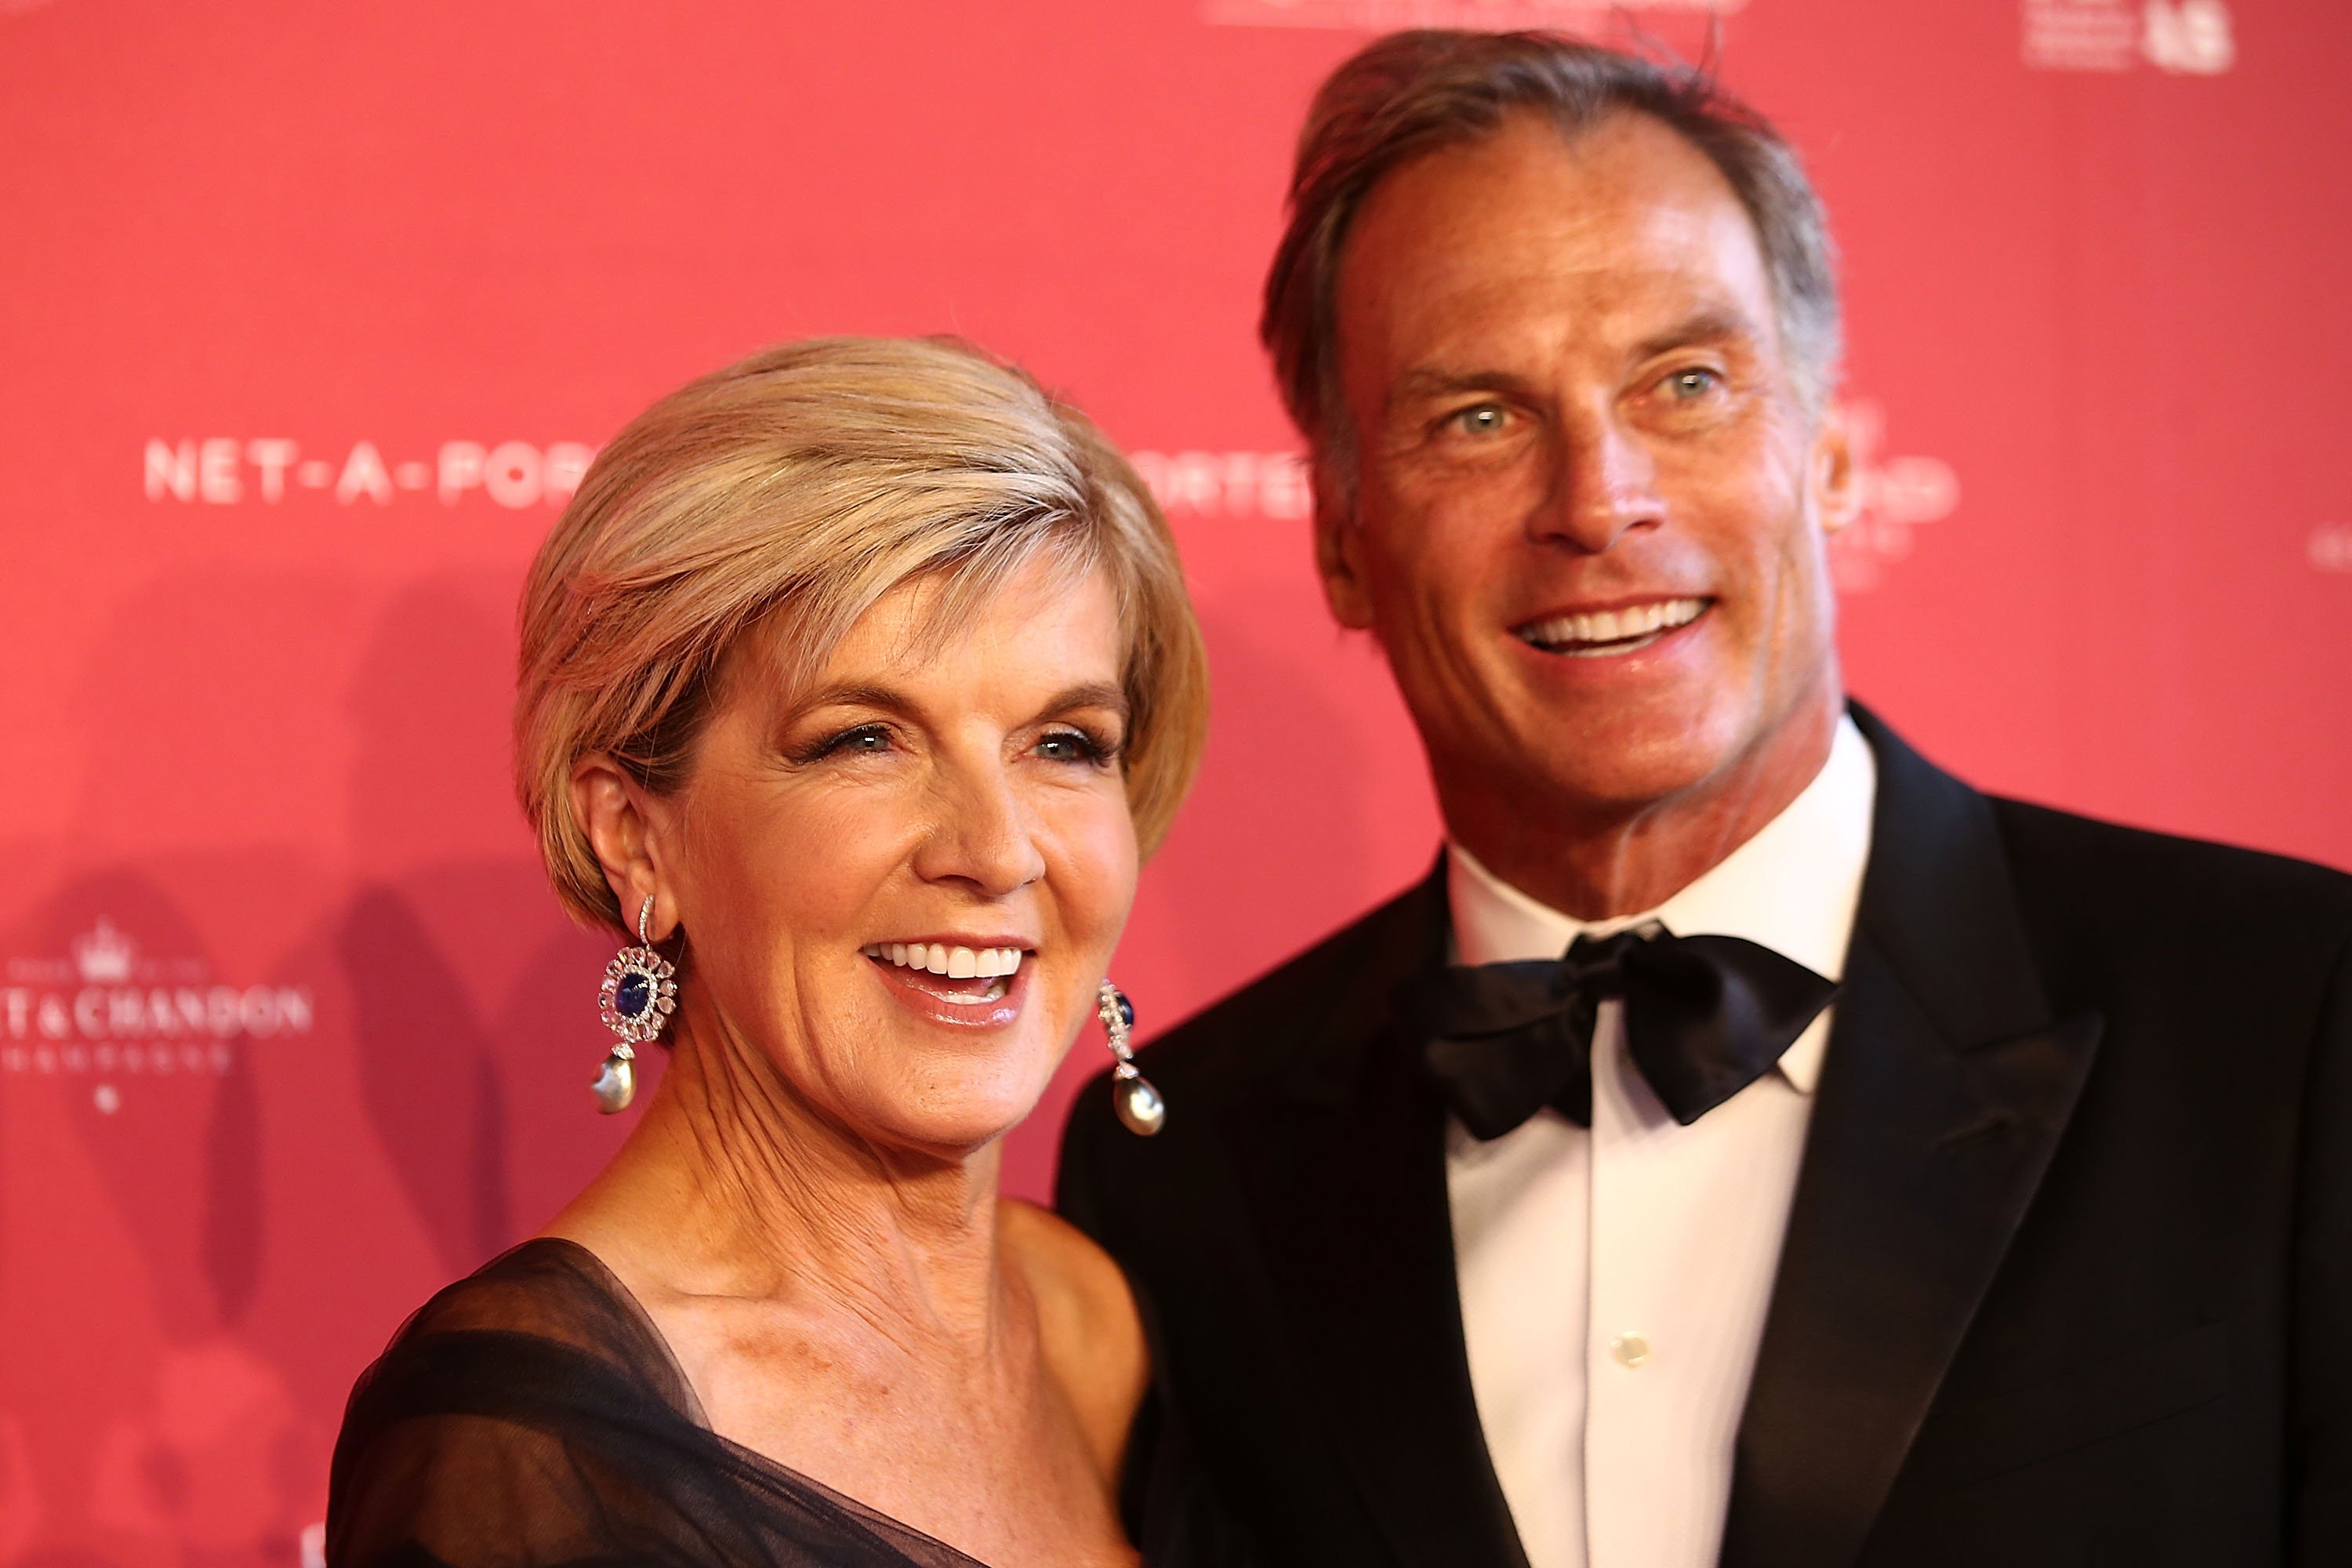 Julie Bishop and husband David Panton at the Powerhouse Museum in Sydney, Australia | Photo: Getty Images